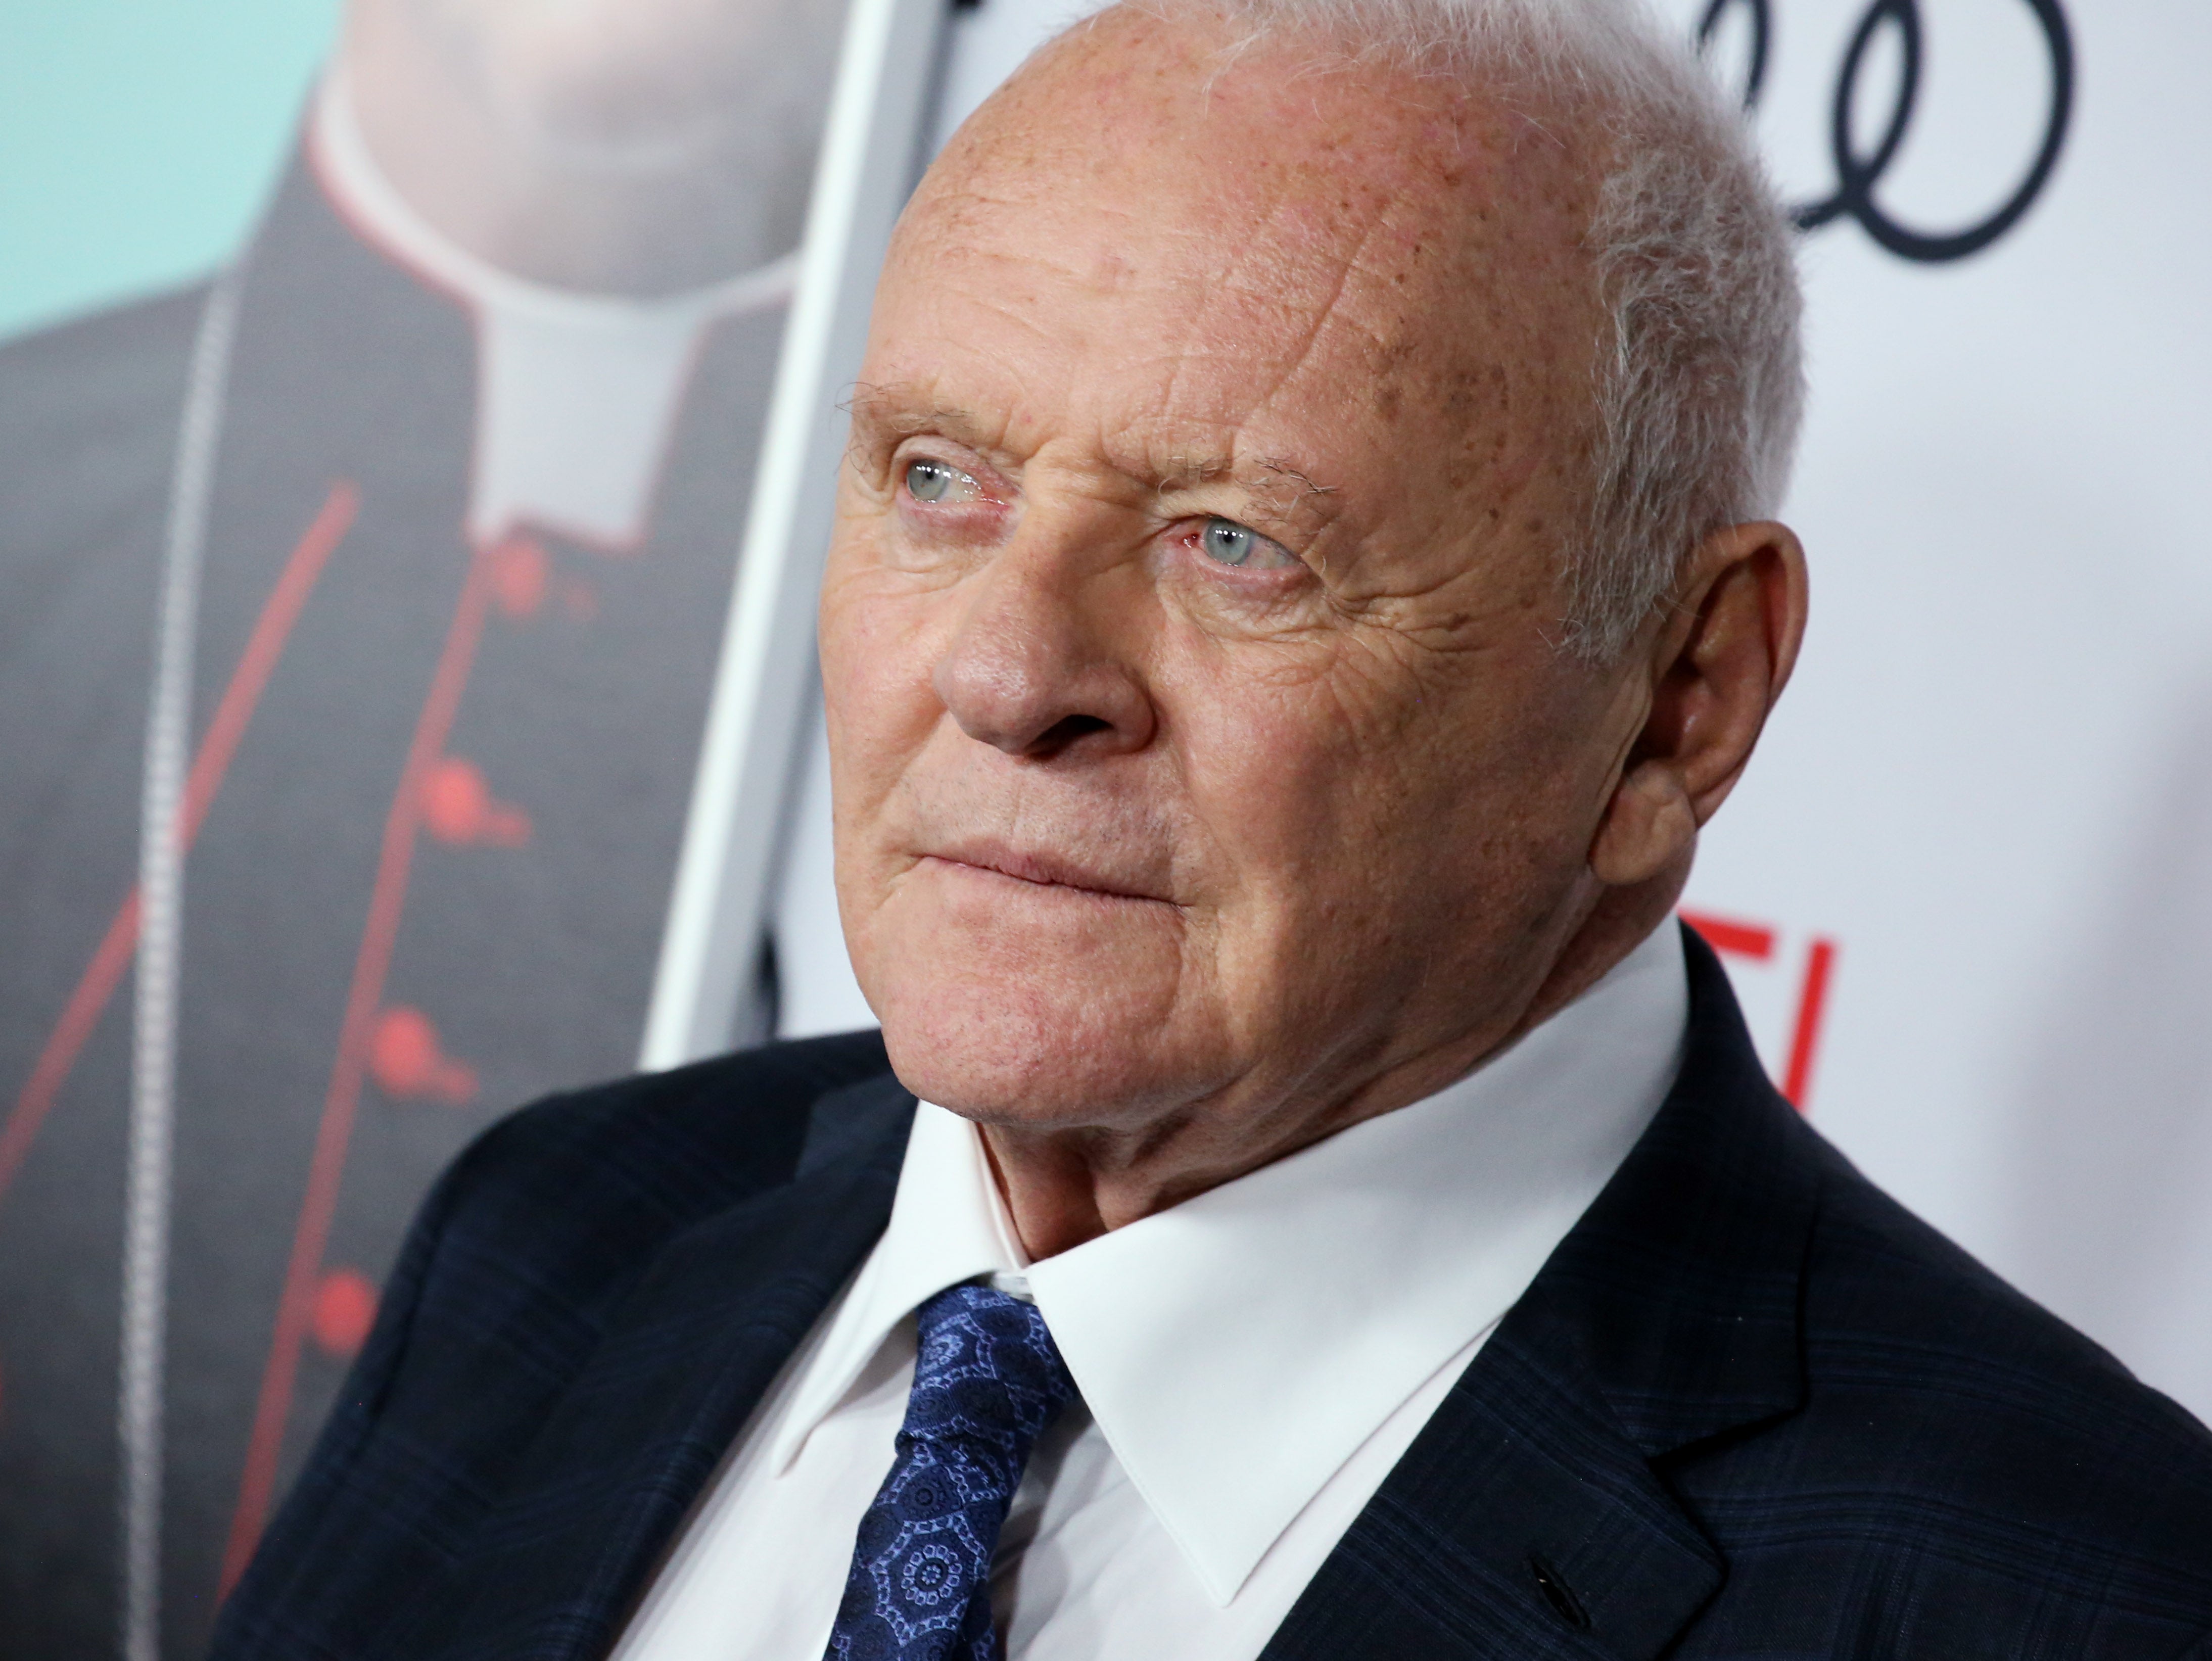 Sir Anthony Hopkins committed to sobriety in 1975